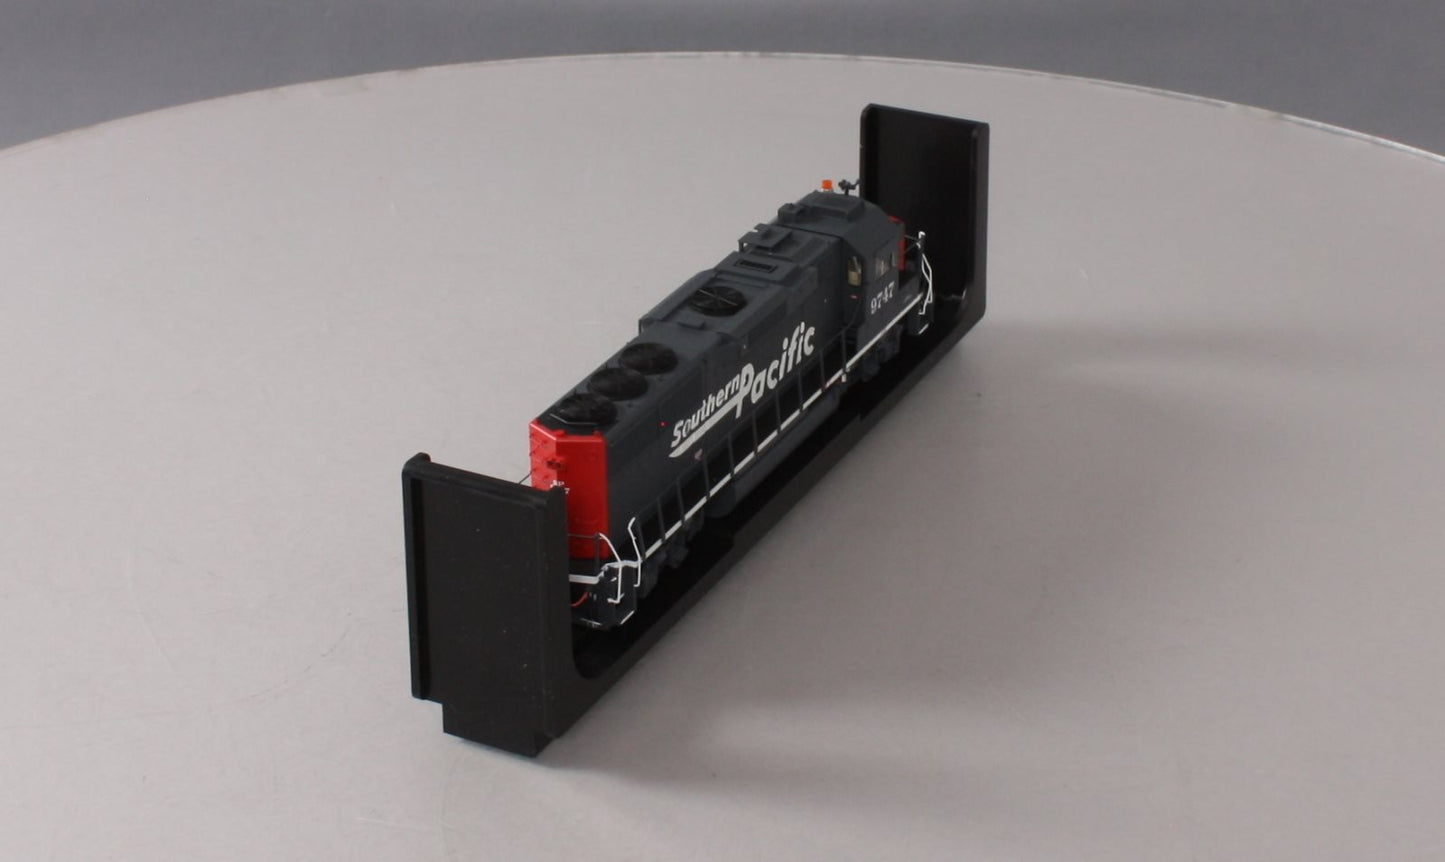 Fox Valley Models 20452-S HO Southern Pacific GP60 Diesel Loco LosSound #9747